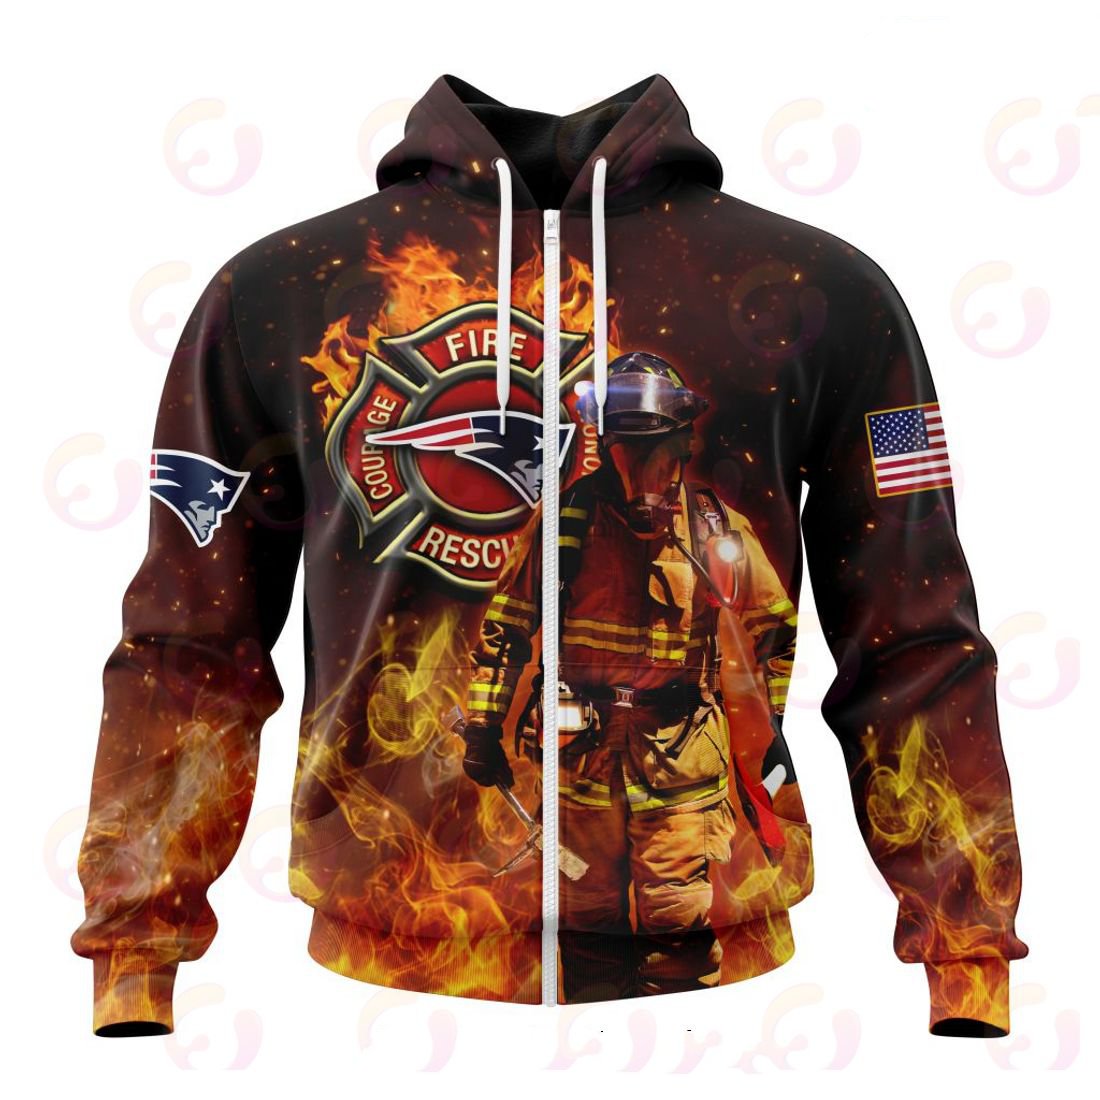 NEW ENGLAND PATRIOTS HONOR FIREFIGHTERS – FIRST RESPONDERS 3D HOODIE